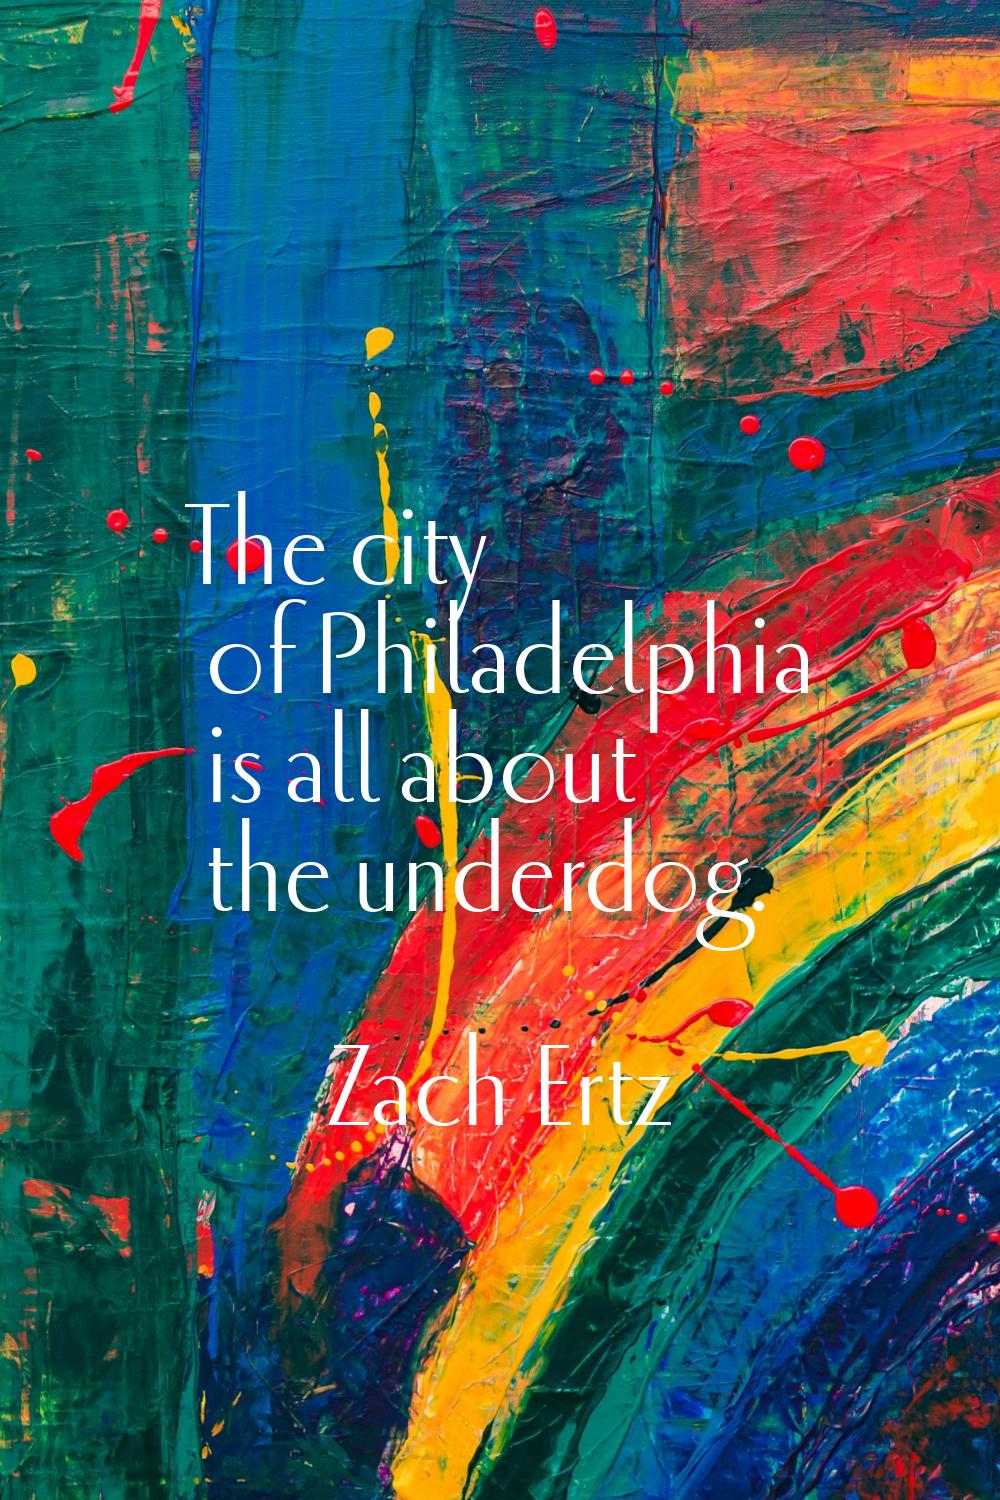 The city of Philadelphia is all about the underdog.